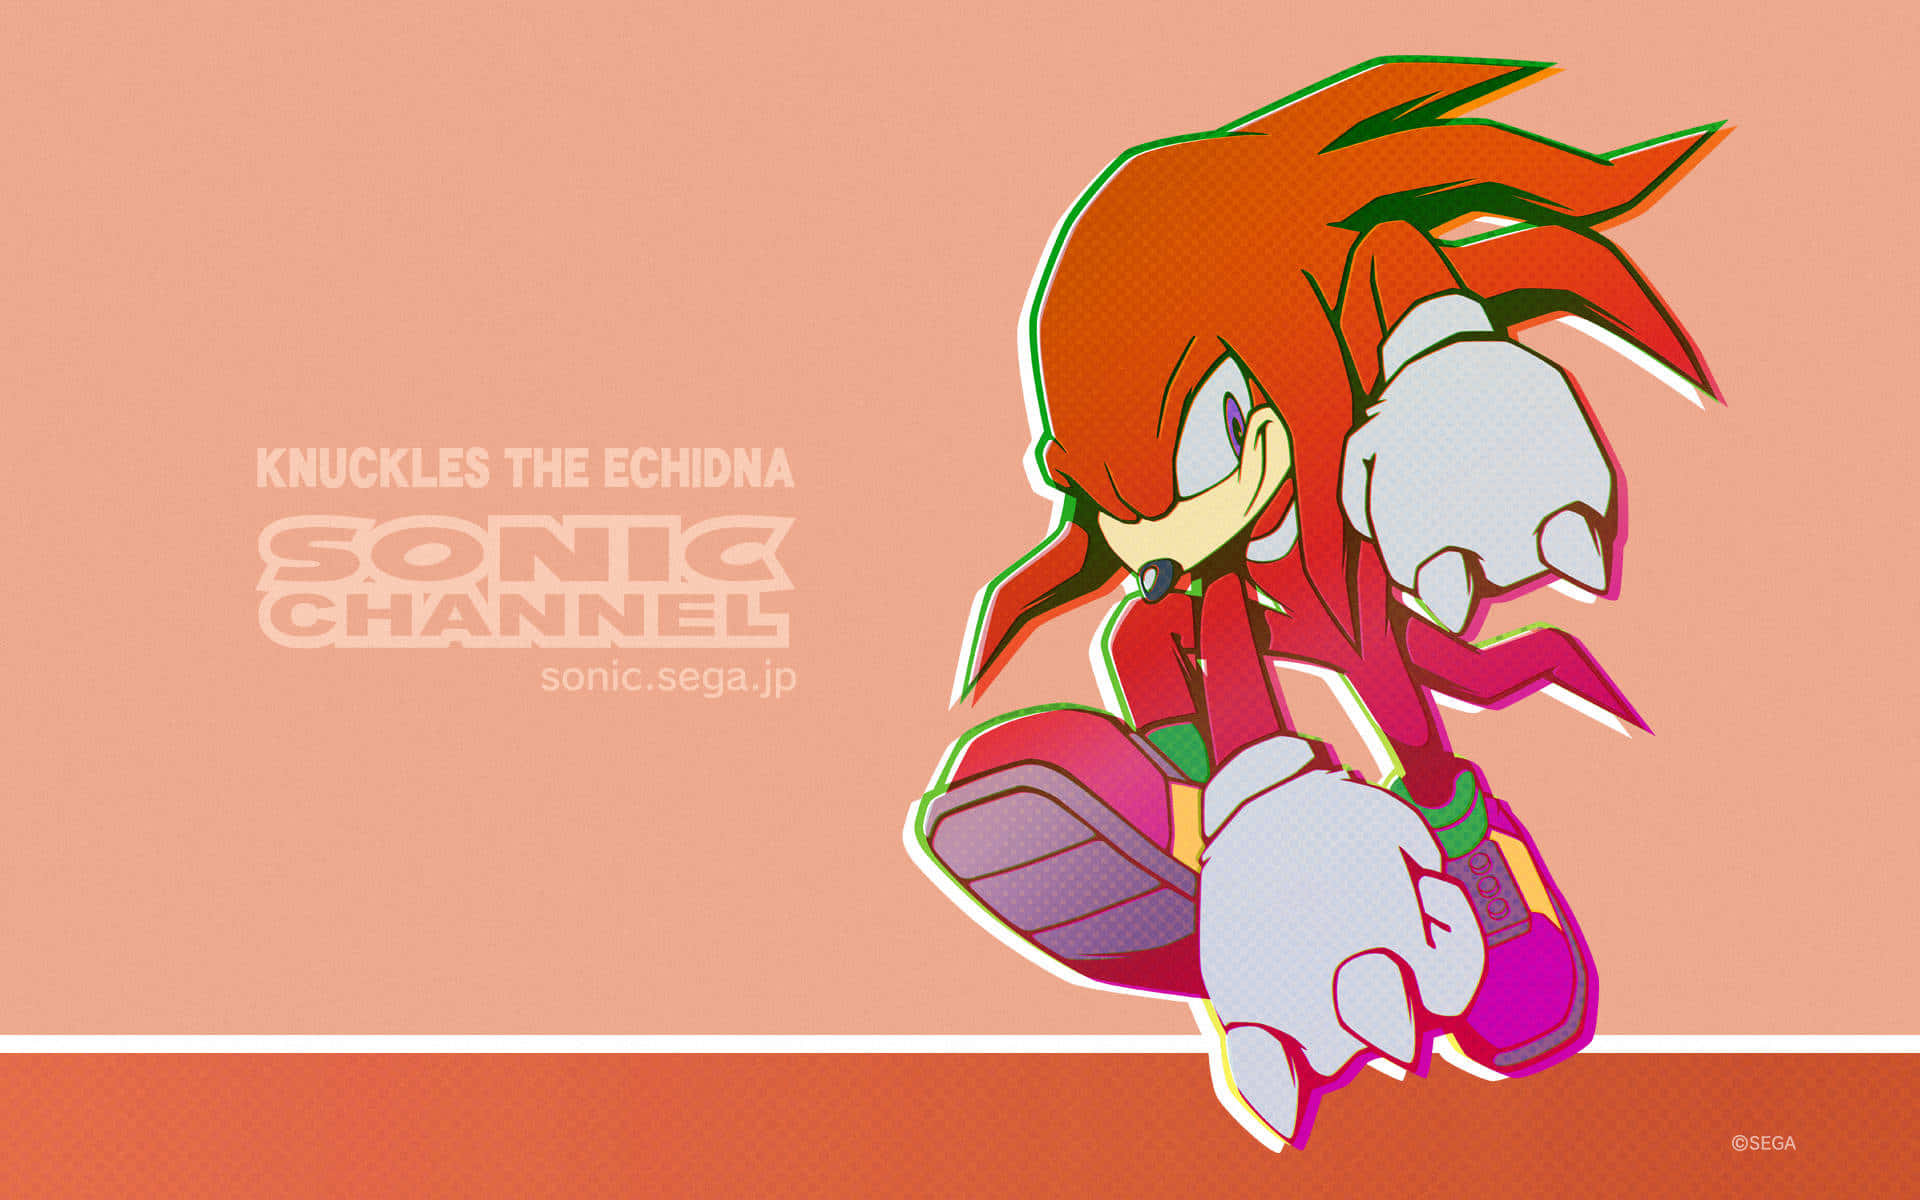 Knuckles The Echidna, A Fan Favorite Character From The Sonic The Hedgehog Franchise. Wallpaper